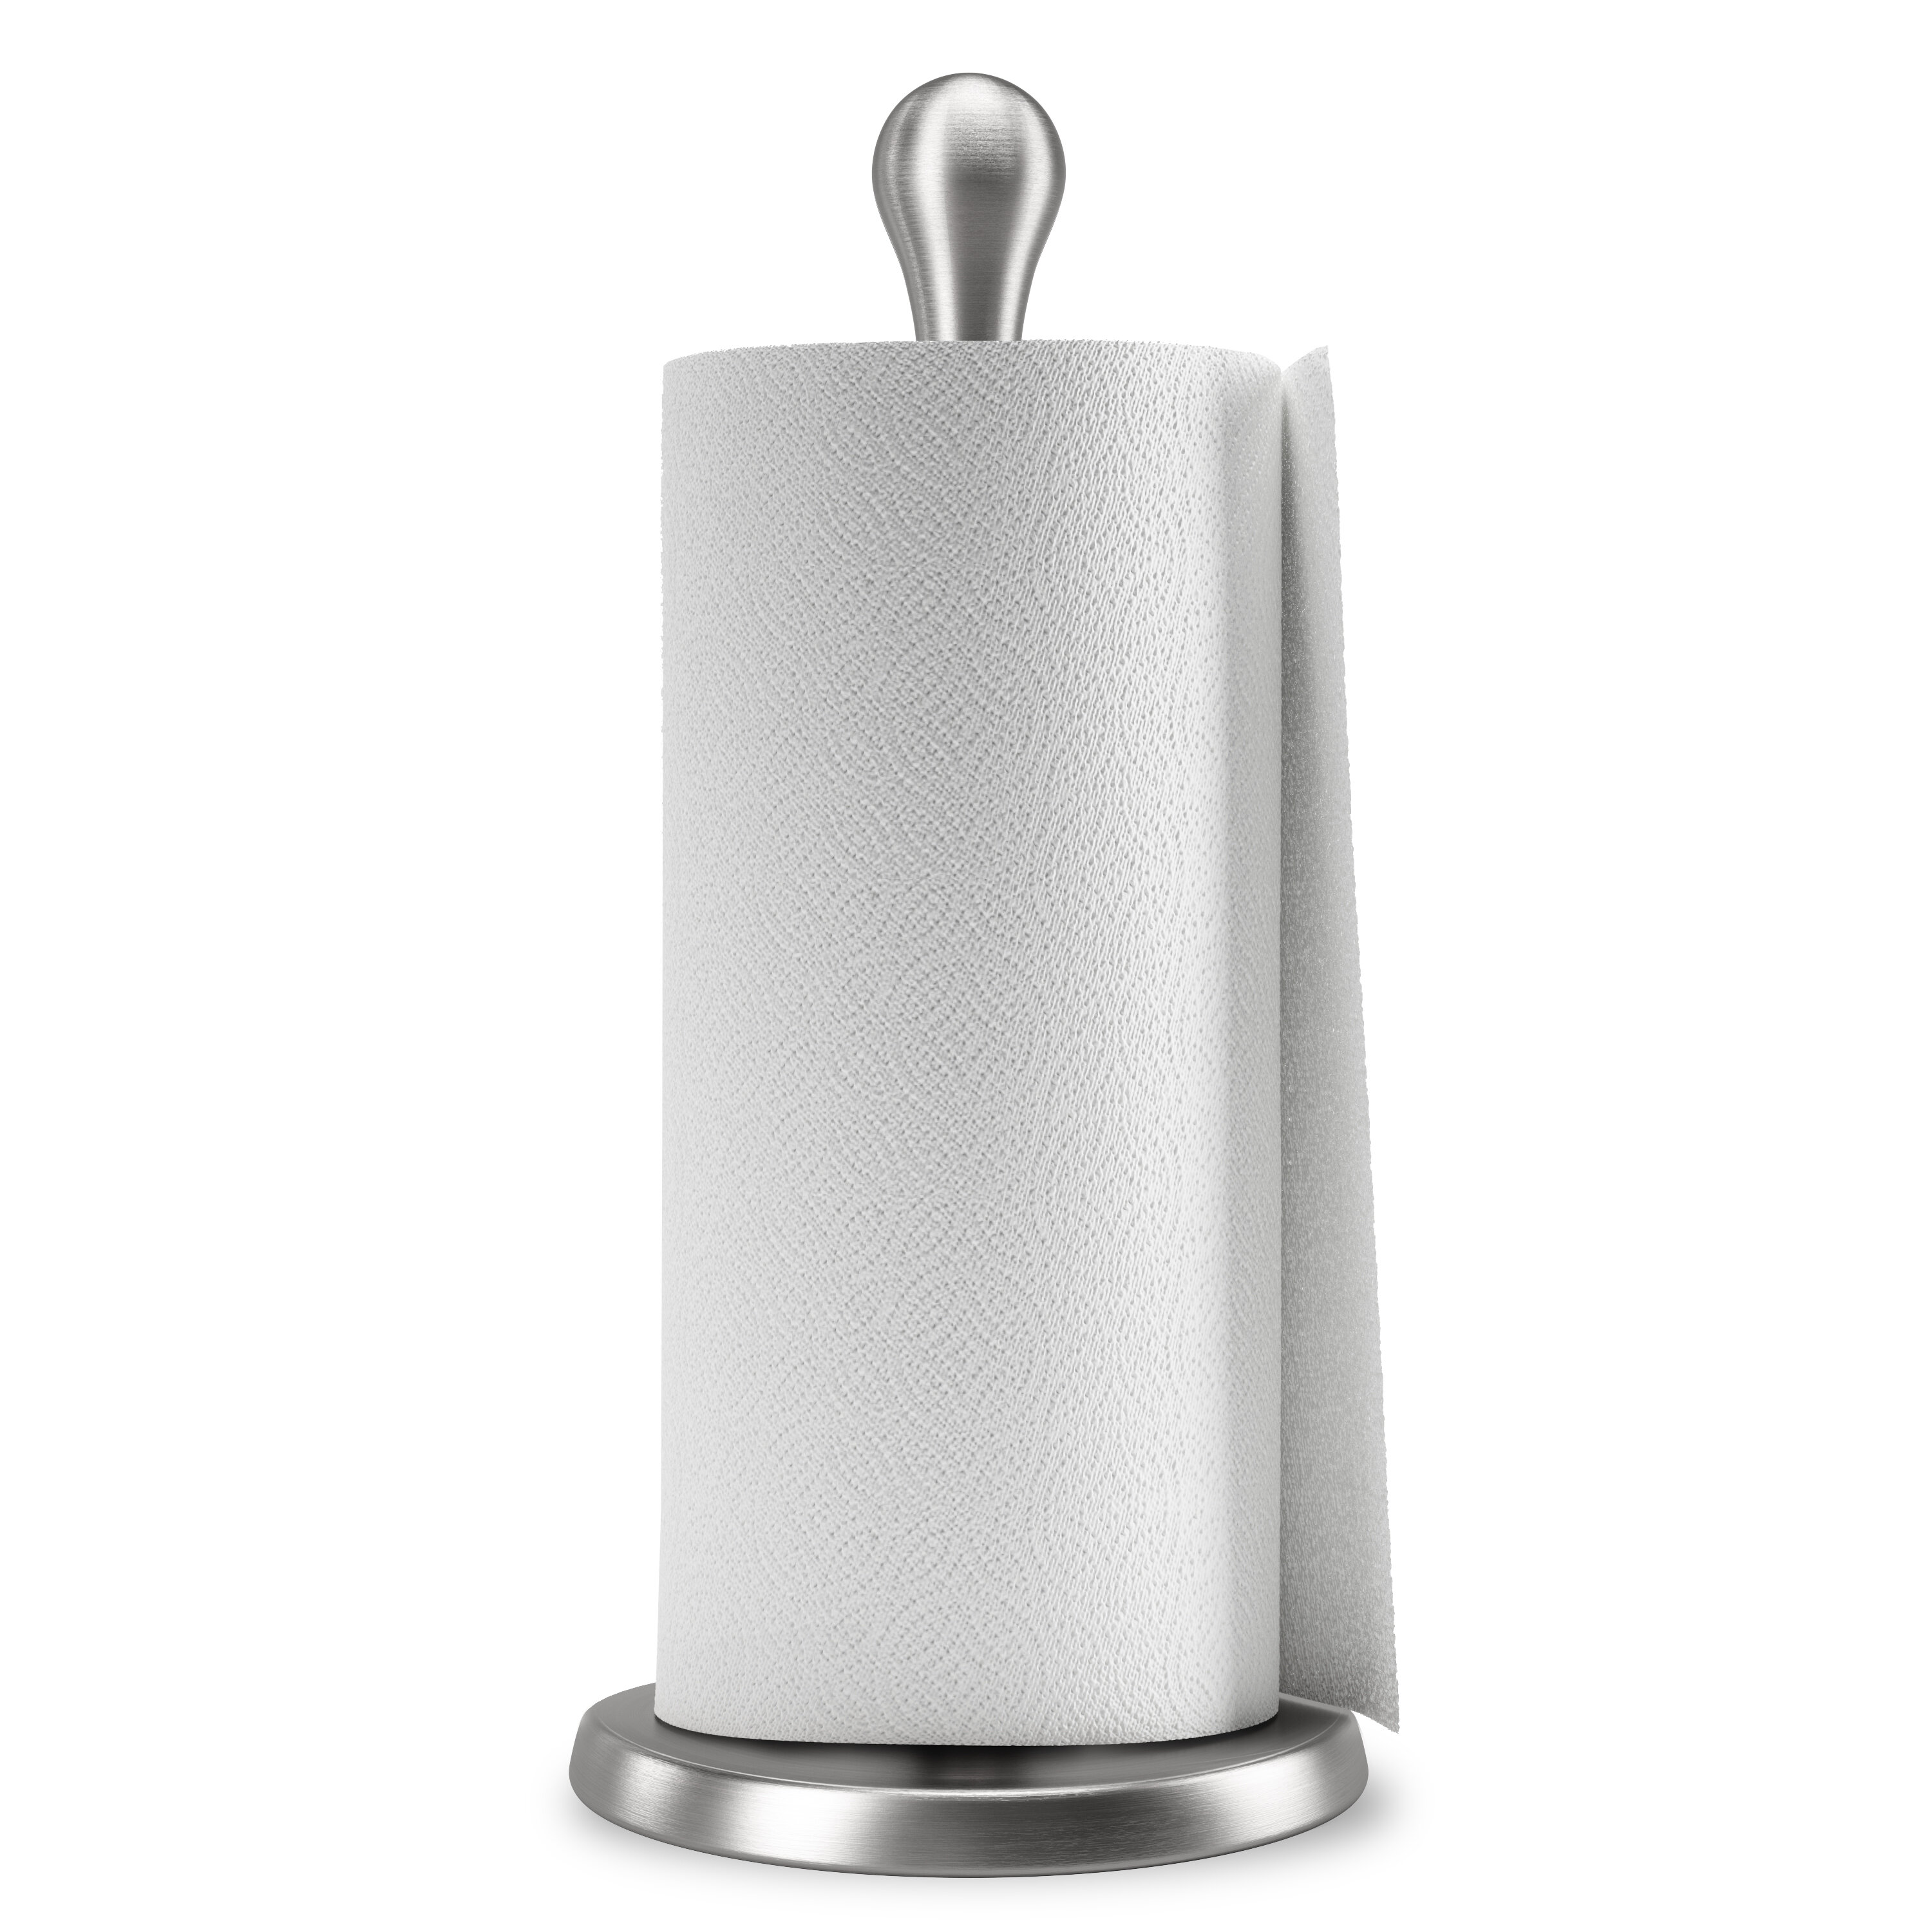 Simplehuman Tension Arm Standing Paper Towel Holder, Stainless Steel &  Reviews